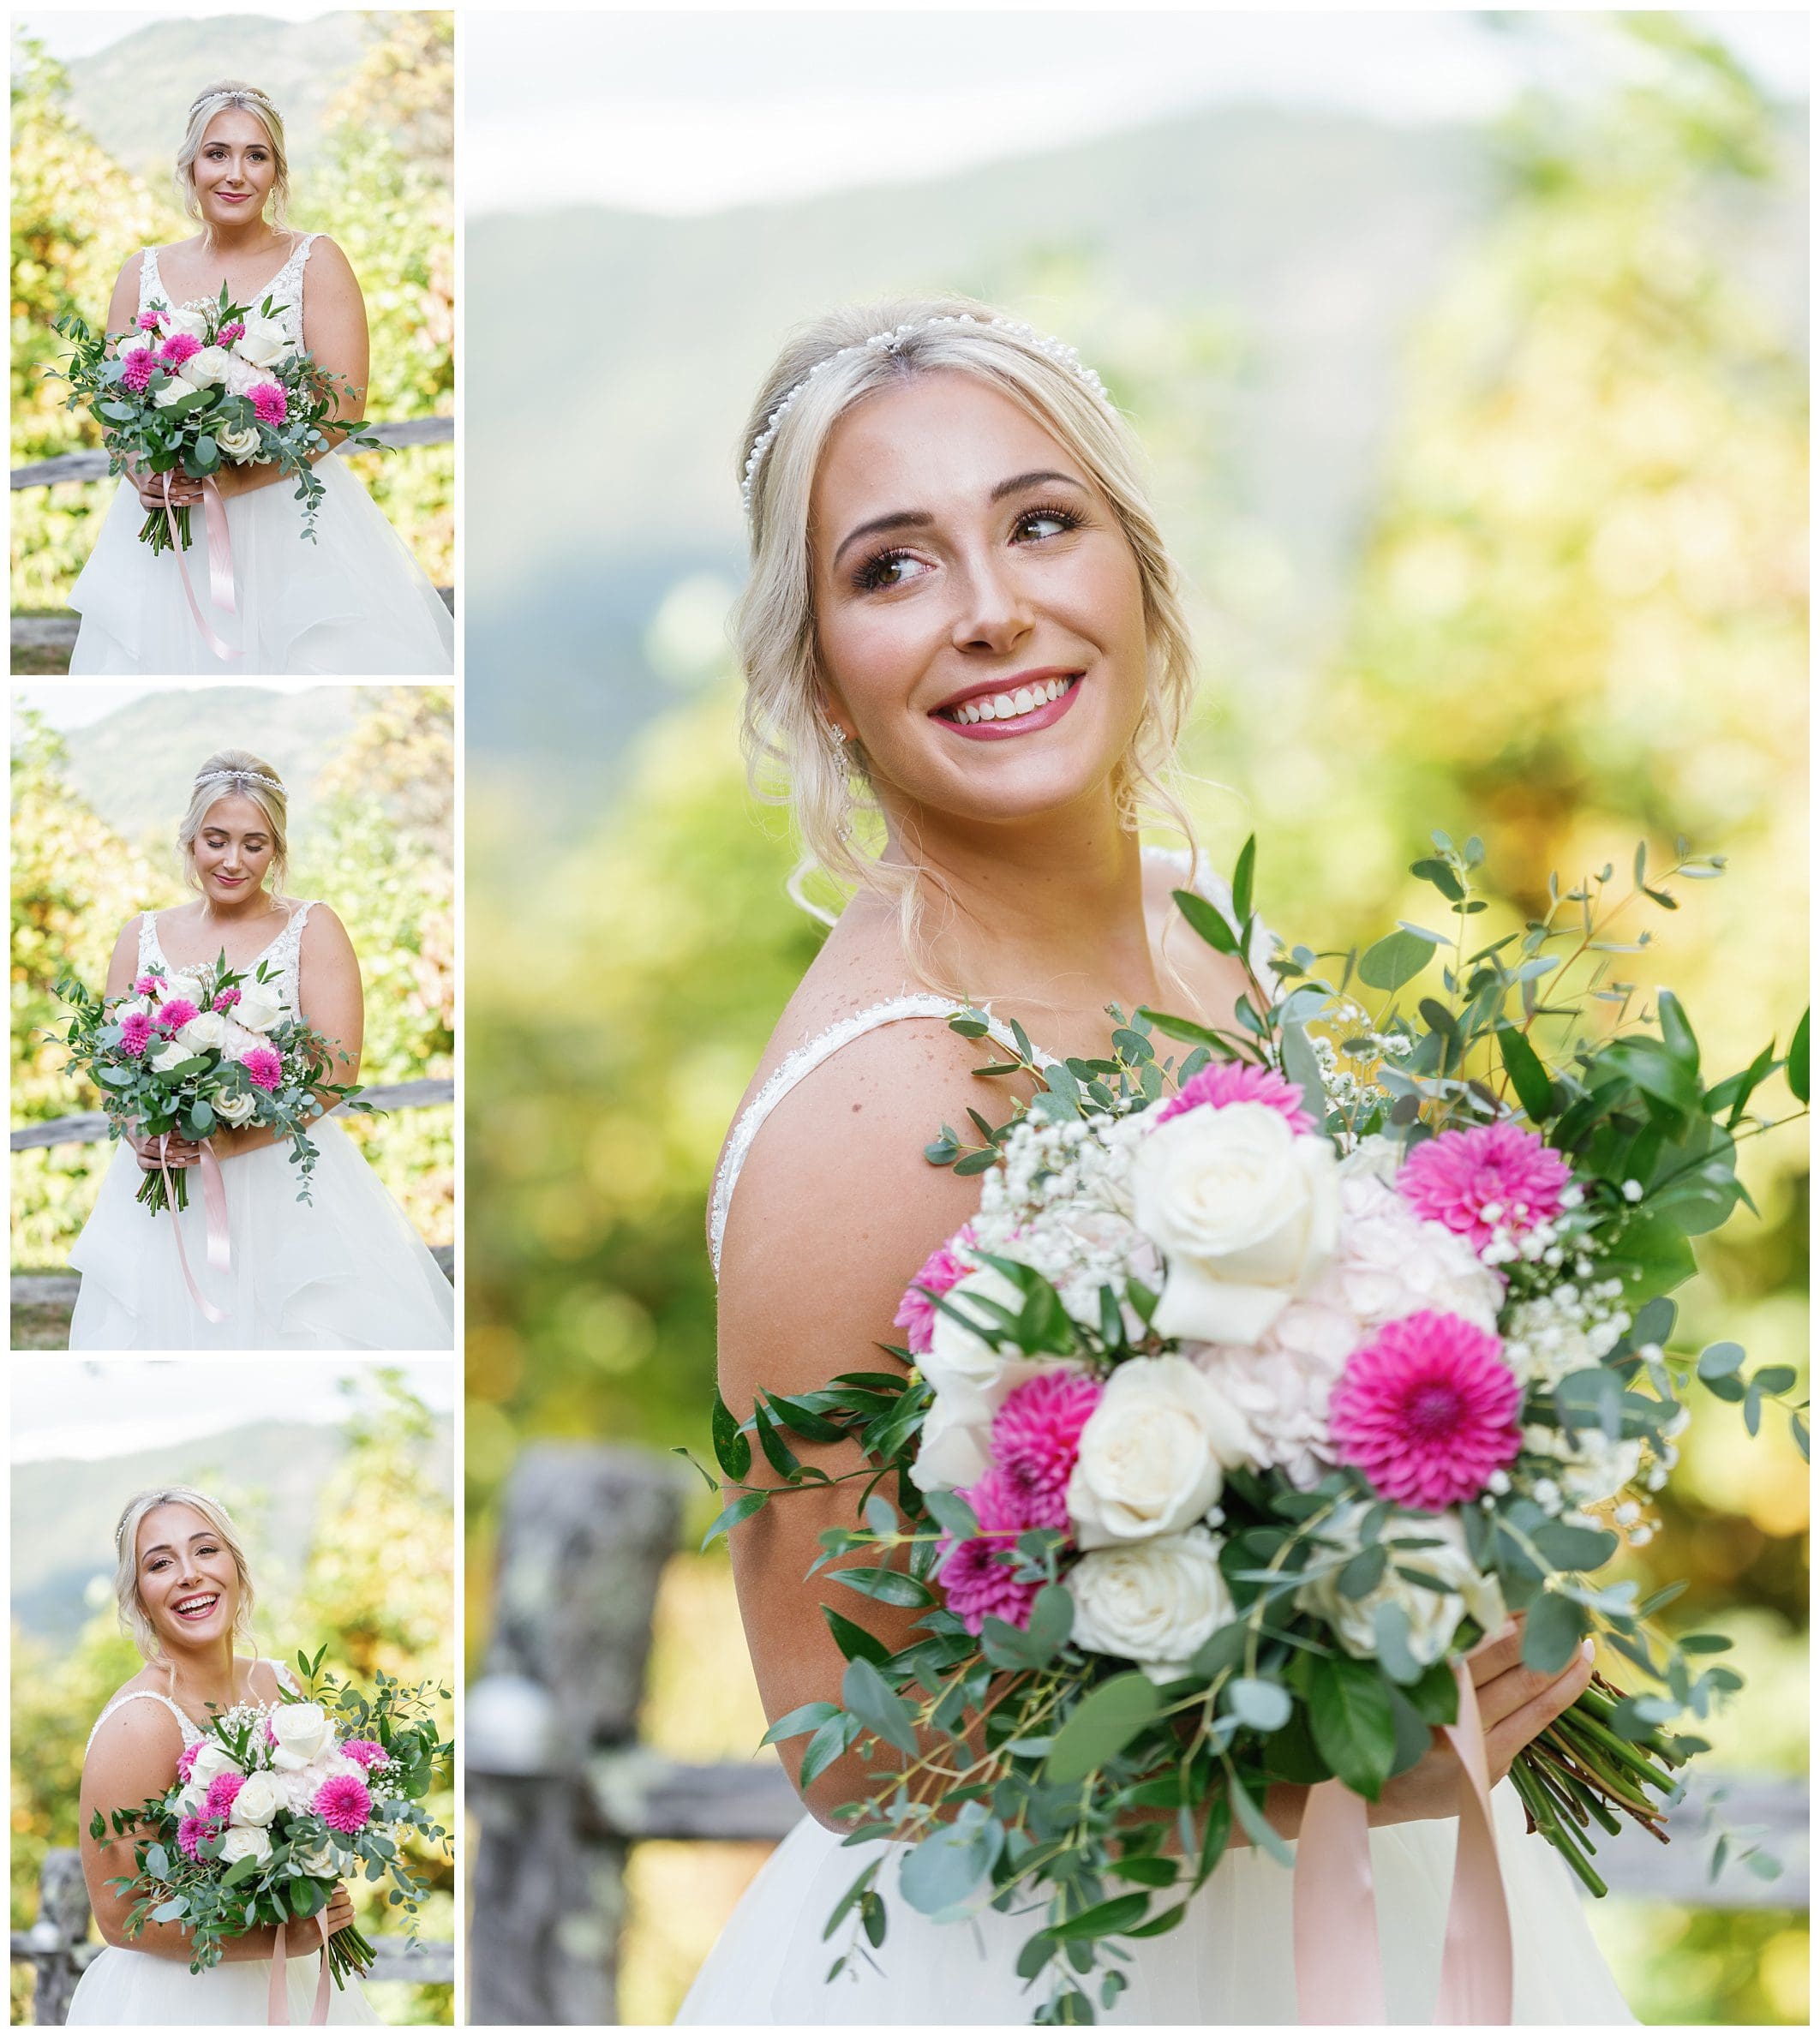 A bride holding a bouquet of pink and white flowers.